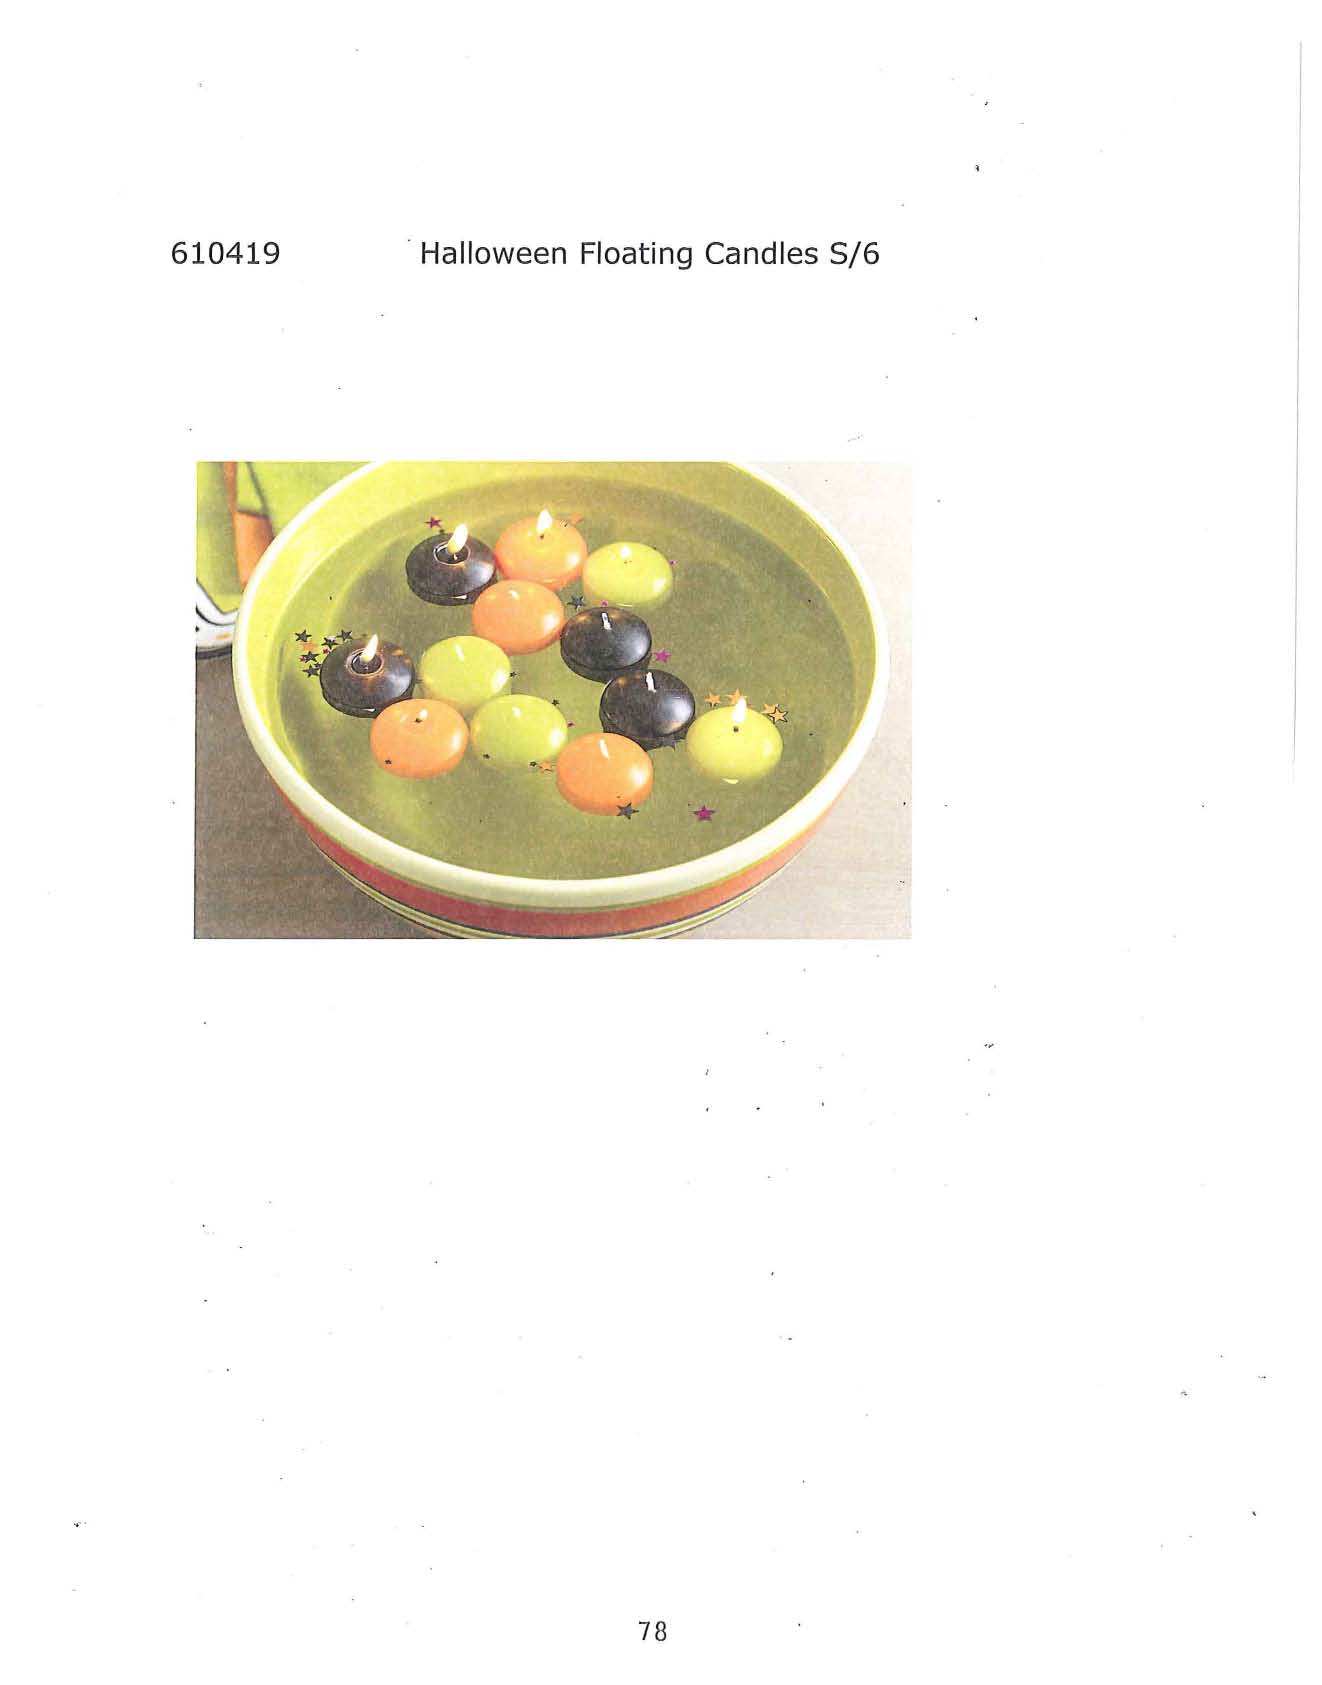 Halloween Floating Candle s/6